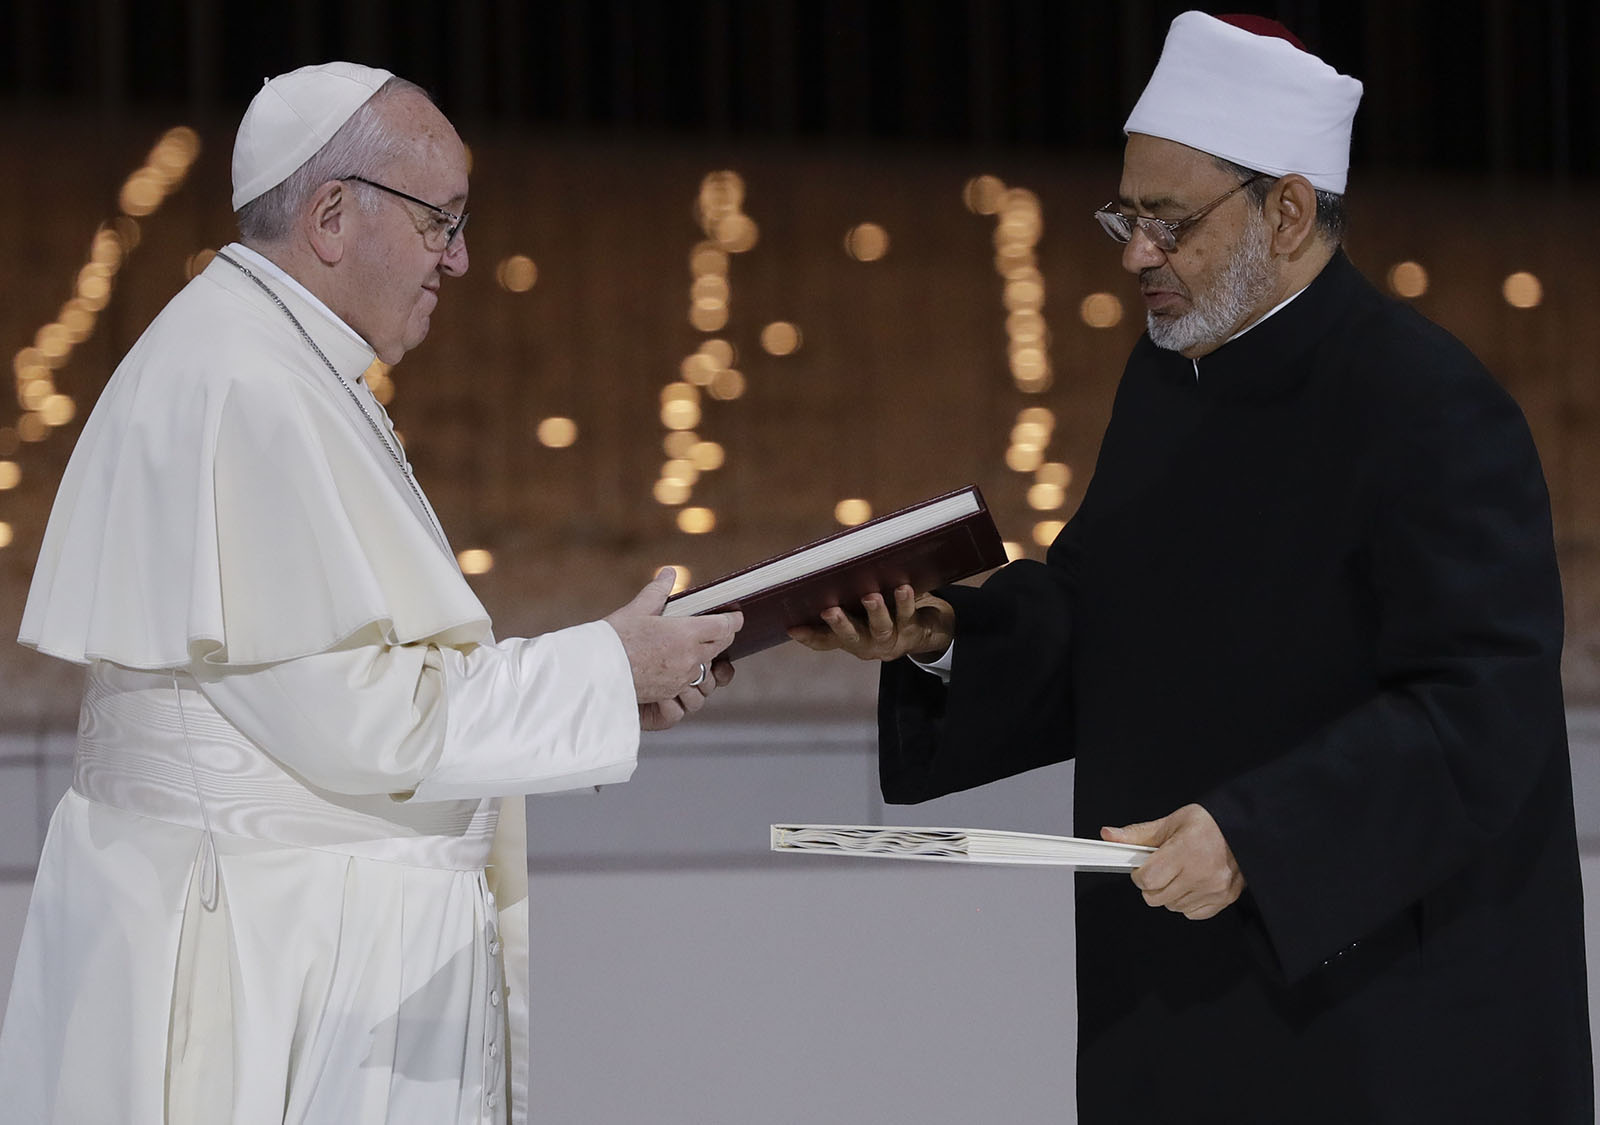 Pope Francis, left, and Sheikh Ahmed el-Tayeb, the grand imam of Egypt's Al-Azhar, exchange a joint statement on "human fraternity" after an interfaith meeting at the Founder's Memorial in Abu Dhabi, United Arab Emirates, Monday, Feb. 4, 2019. (AP Photo/Andrew Medichini)